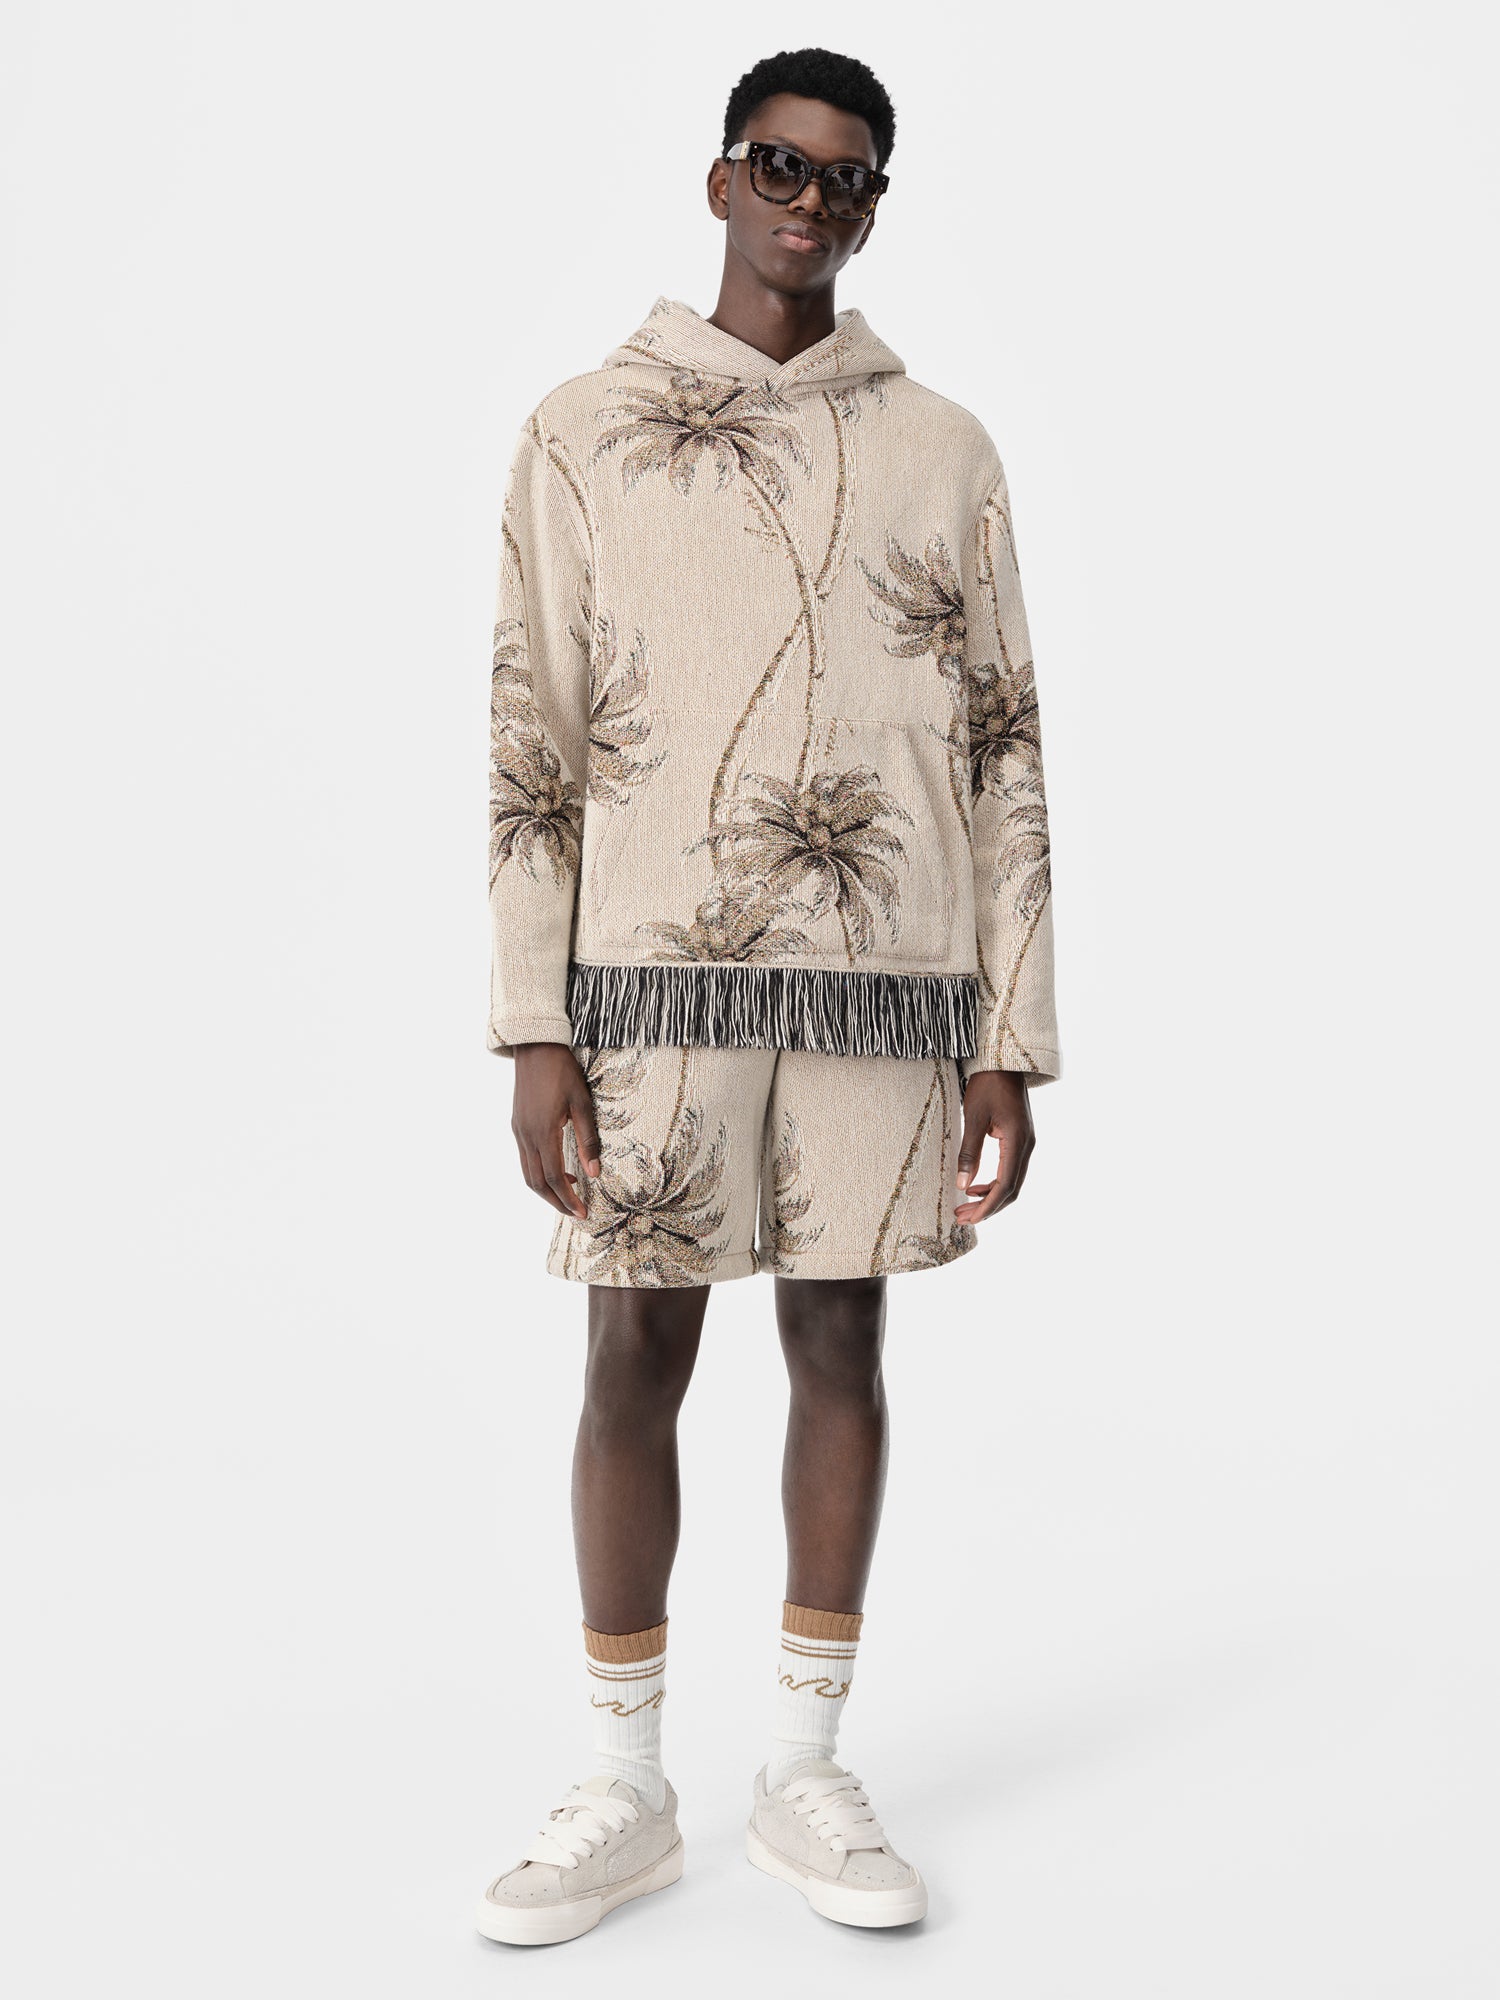 Product TWISTED PALMS TAPESTRY HOODIE - Alabaster featured image